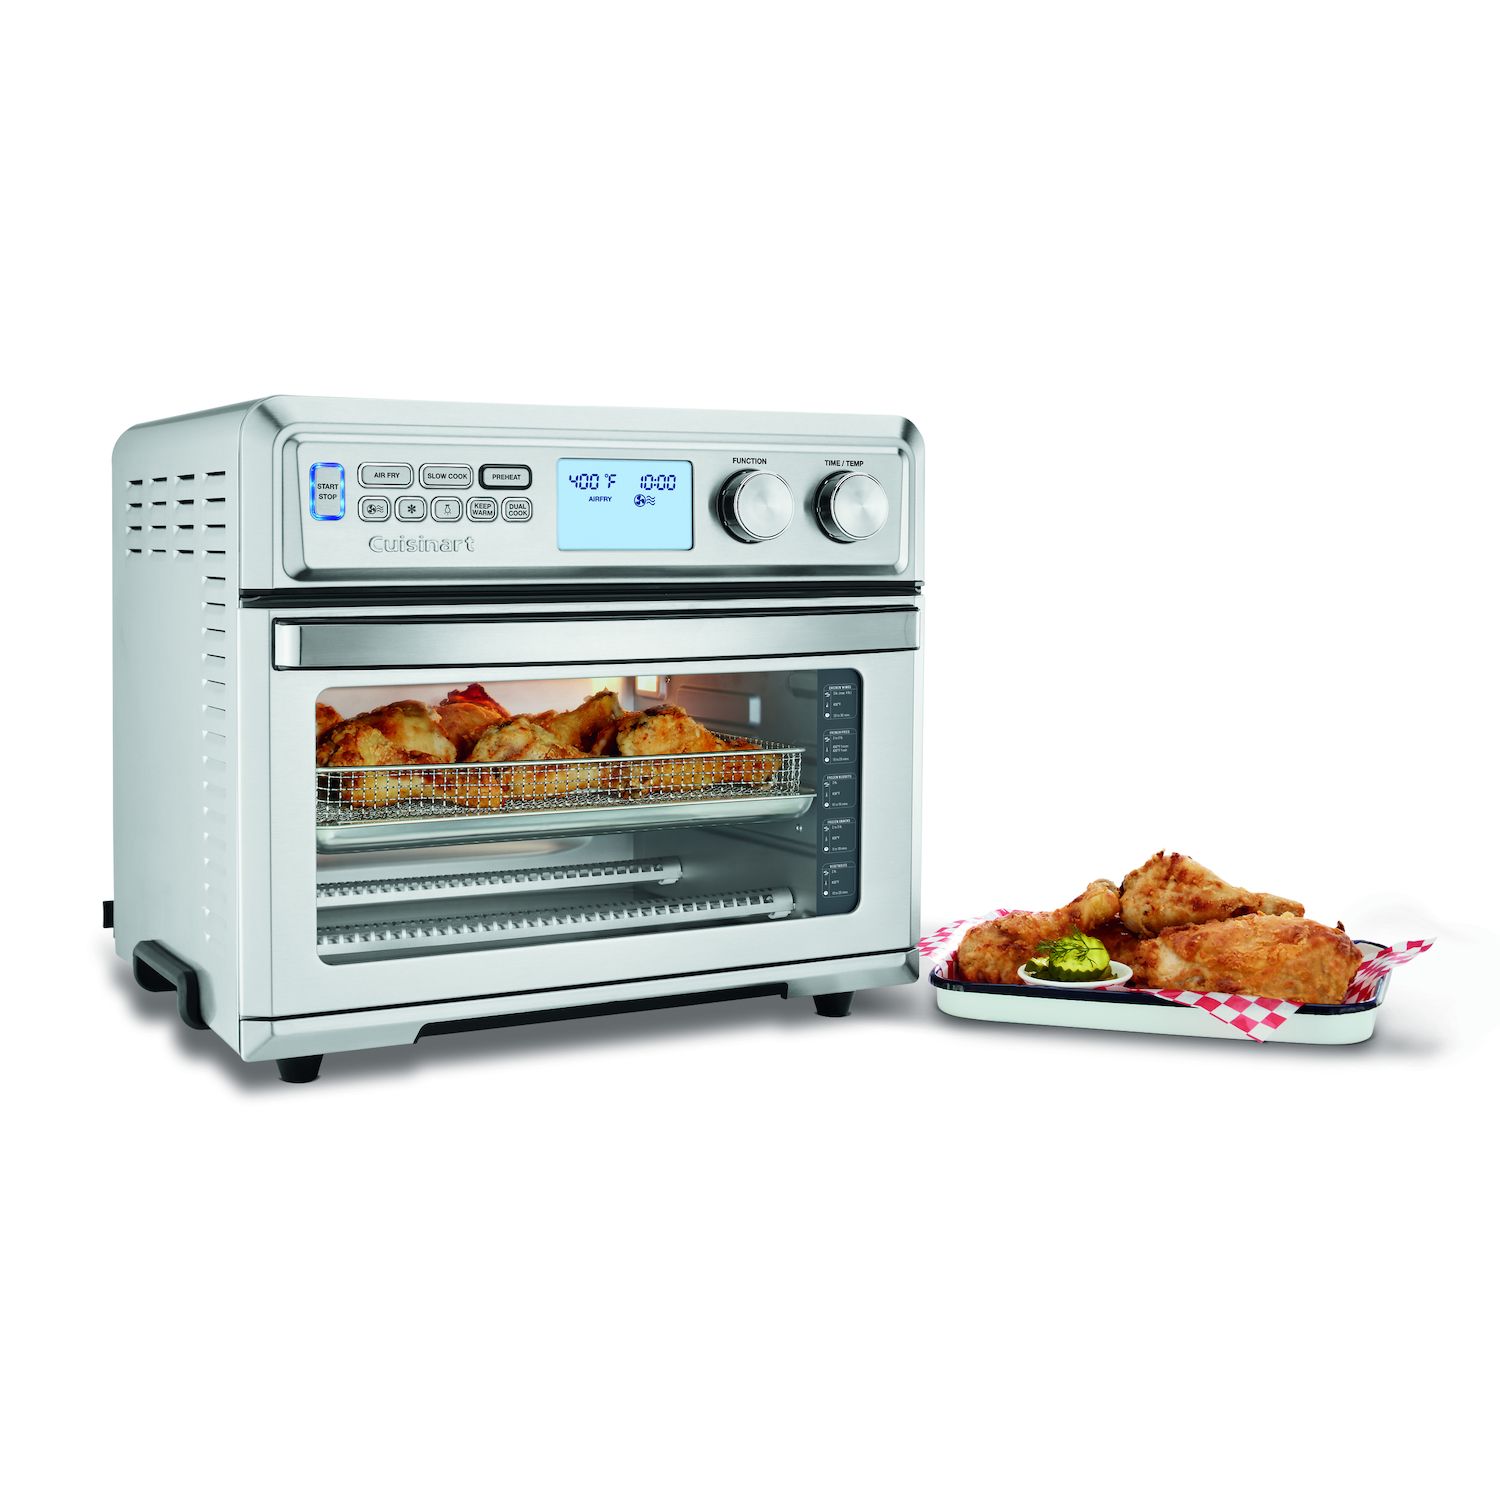 HOMCOM Air Fryer Toaster Oven, 21QT 8-In-1 Convection Oven Countertop,  Broil, Toast, Dehydrator, Thaw and Air Fry, Accessories Included, 1800W,  Stainless Steel Finish